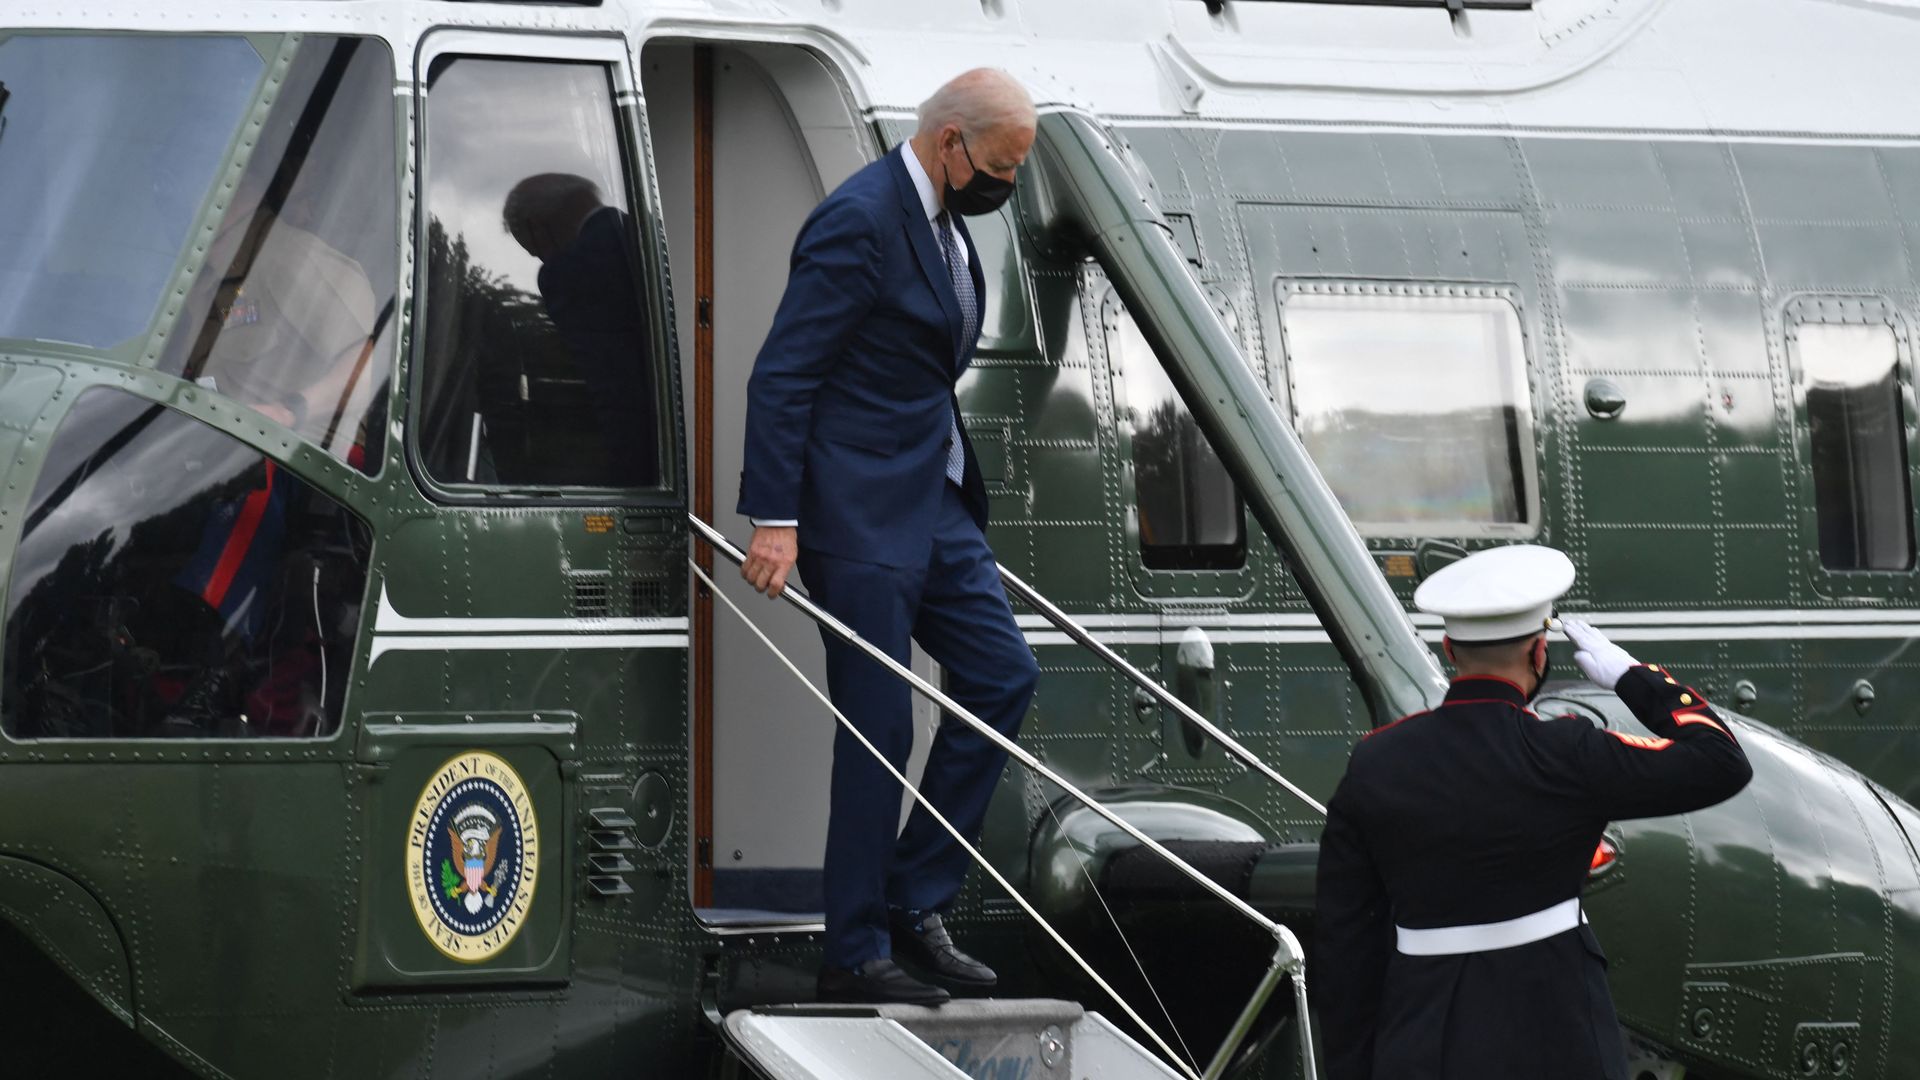 President Biden is seen disembarking from Marine One after returning to Washington on Monday.